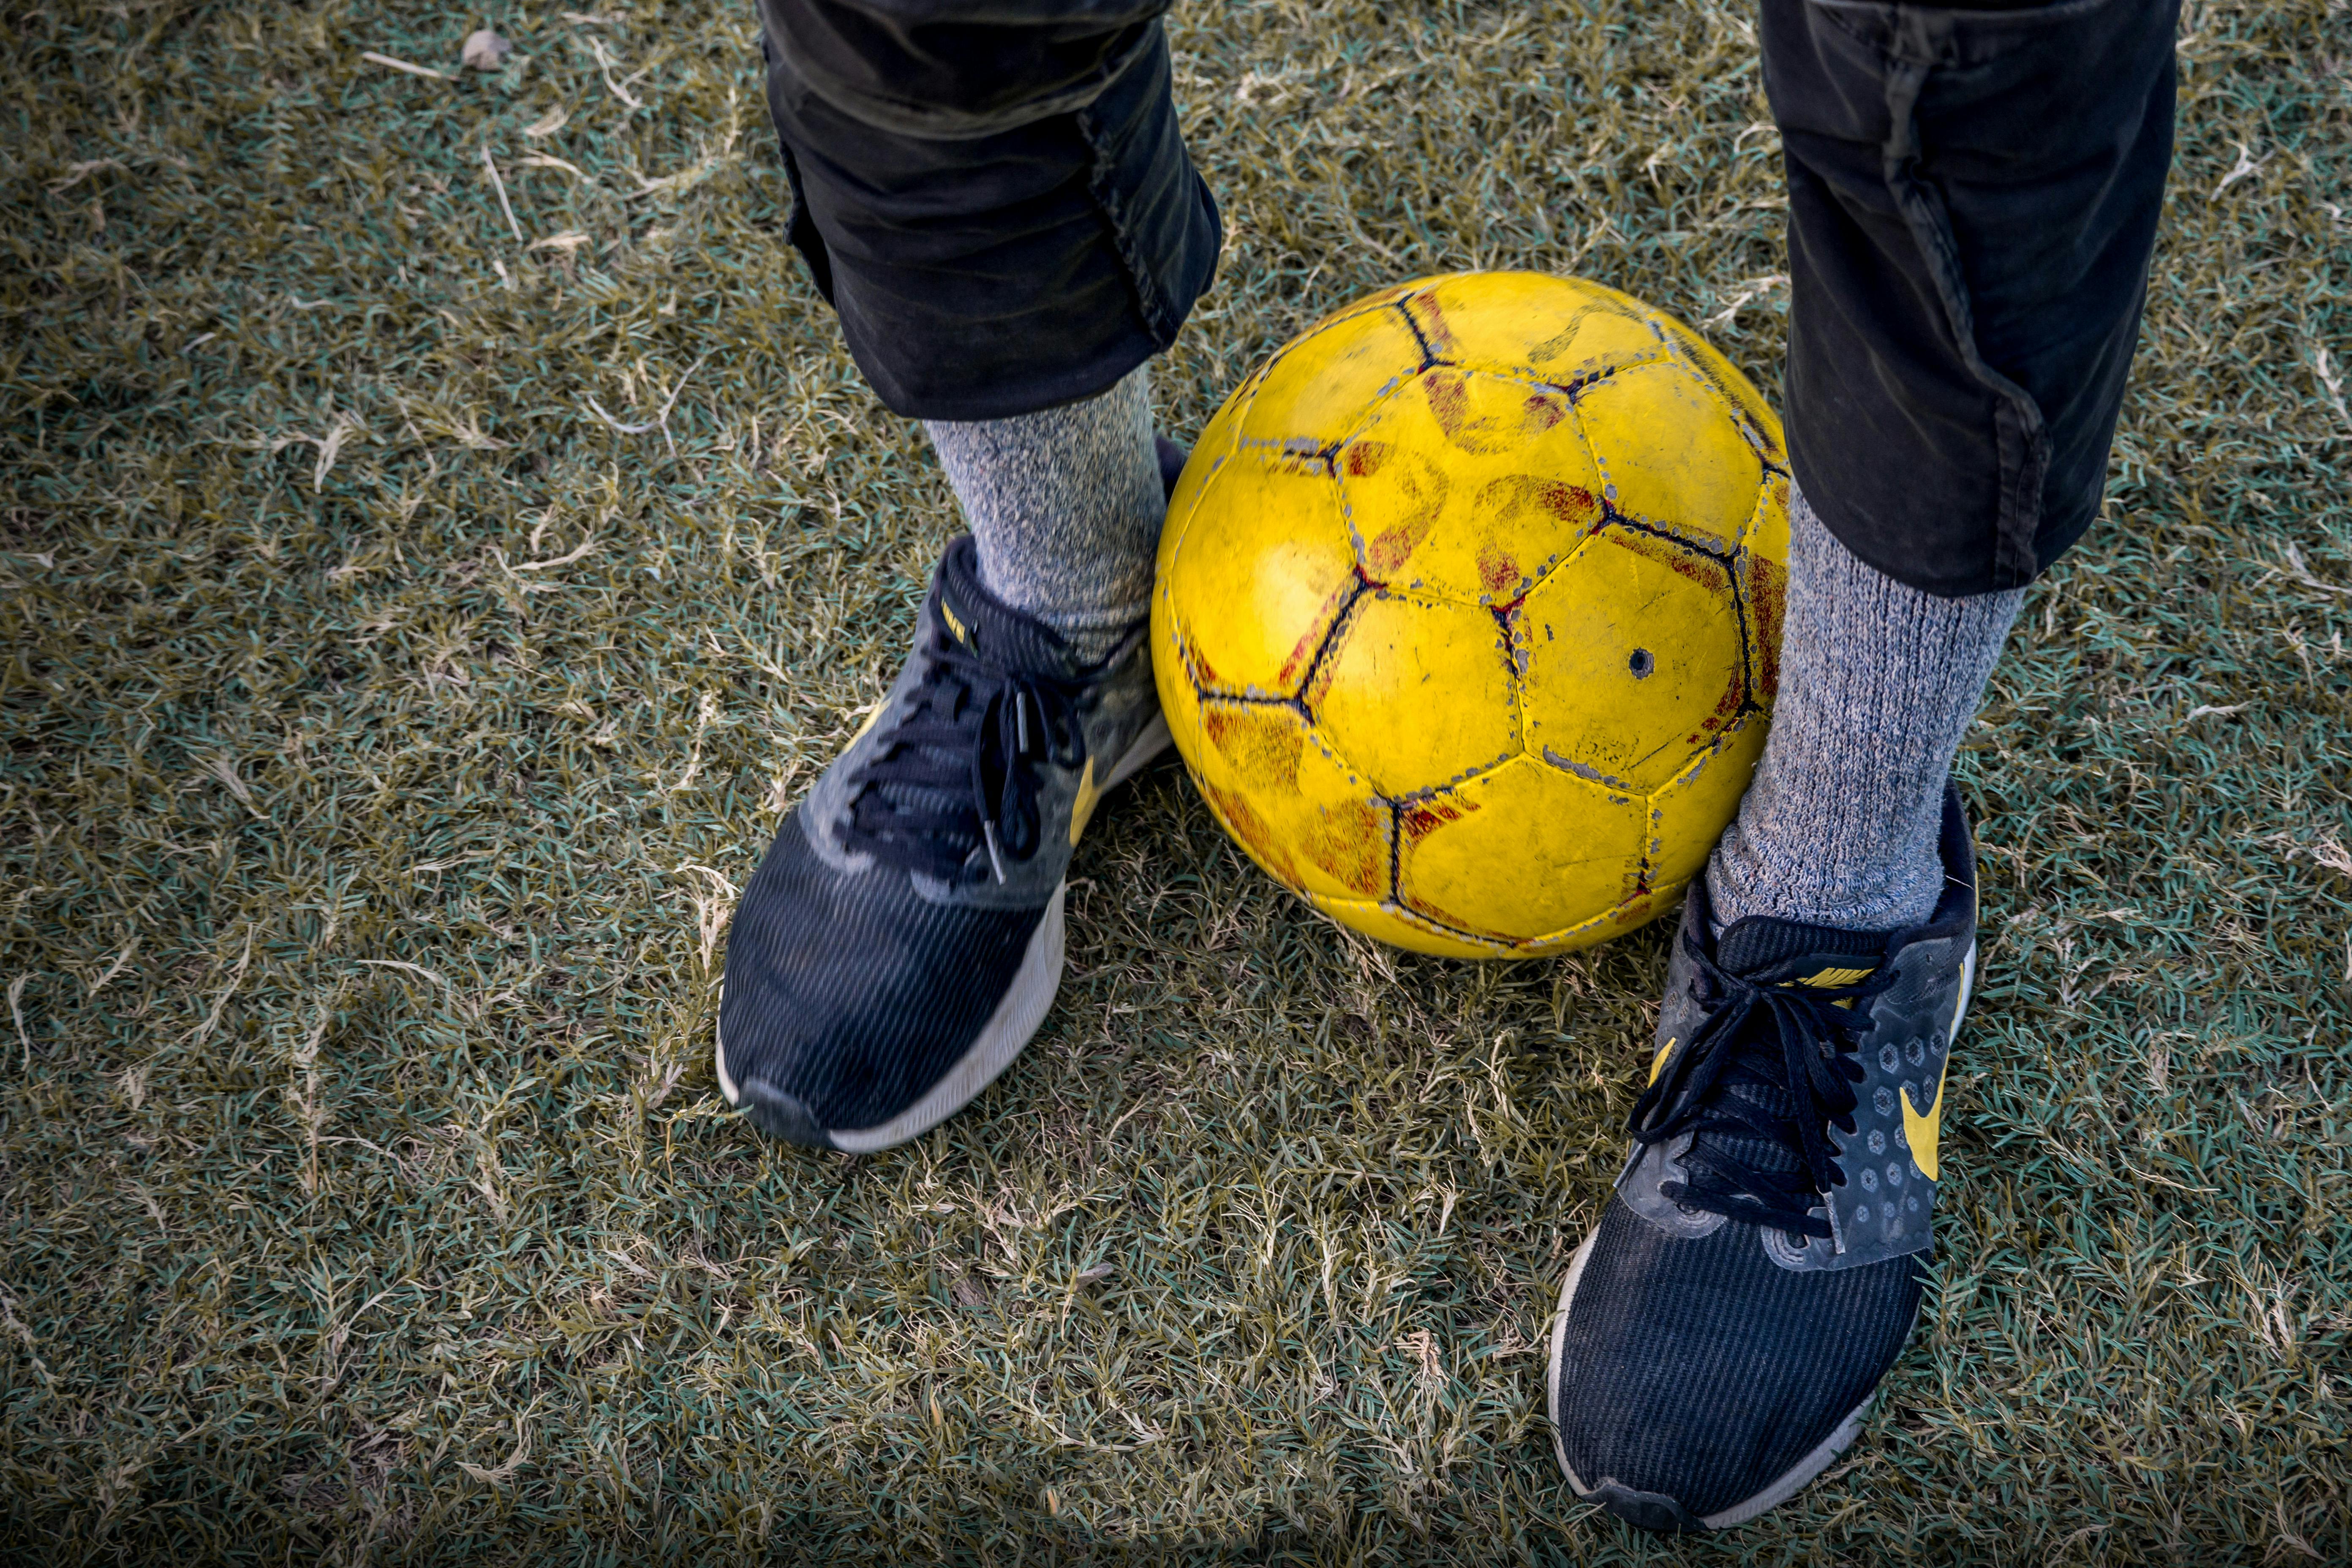 faceless person standing with soccer ball between legs on grass